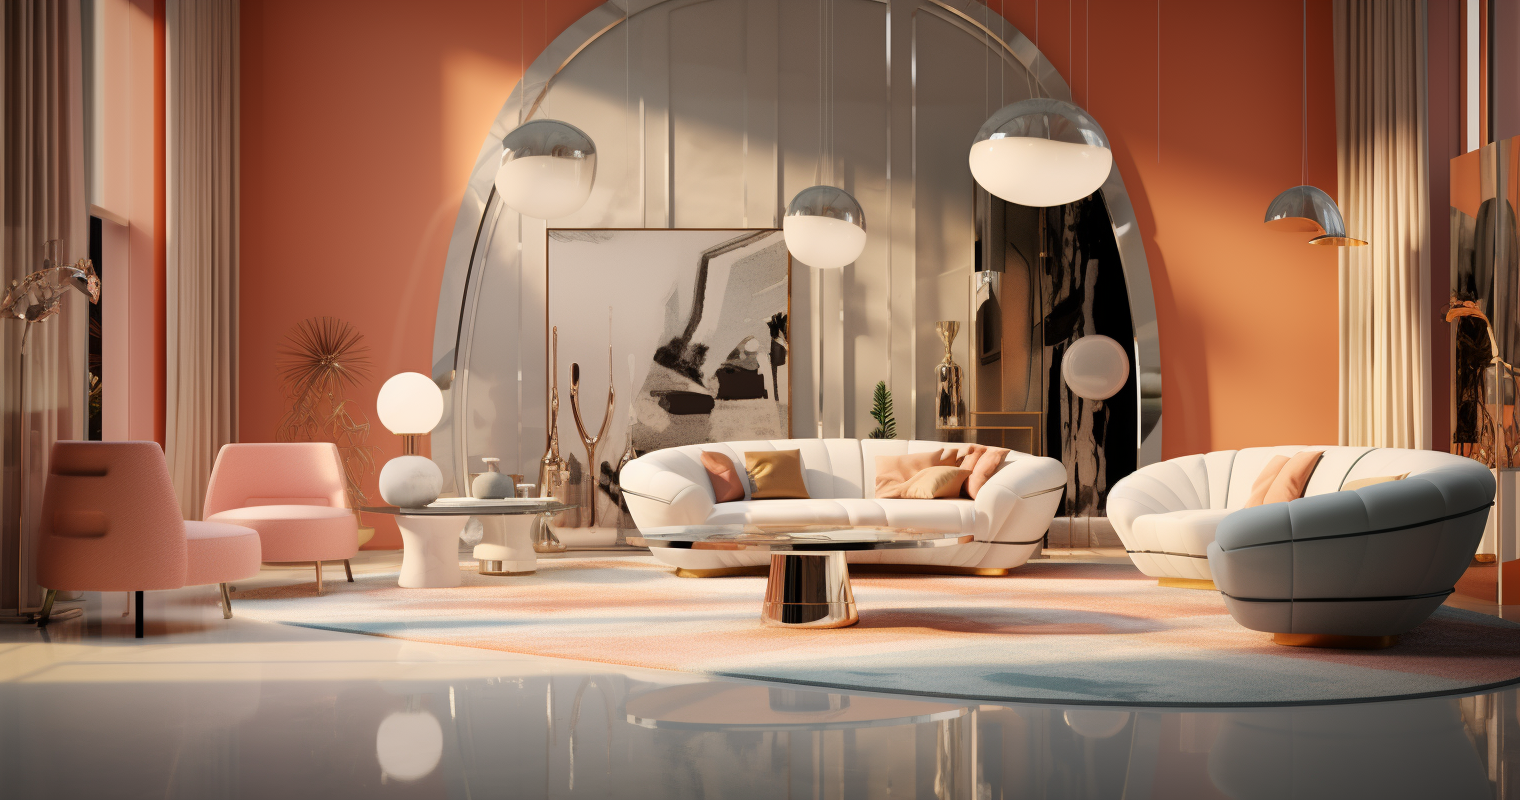 A Realistic 3D Rendering Of An Interior Space 